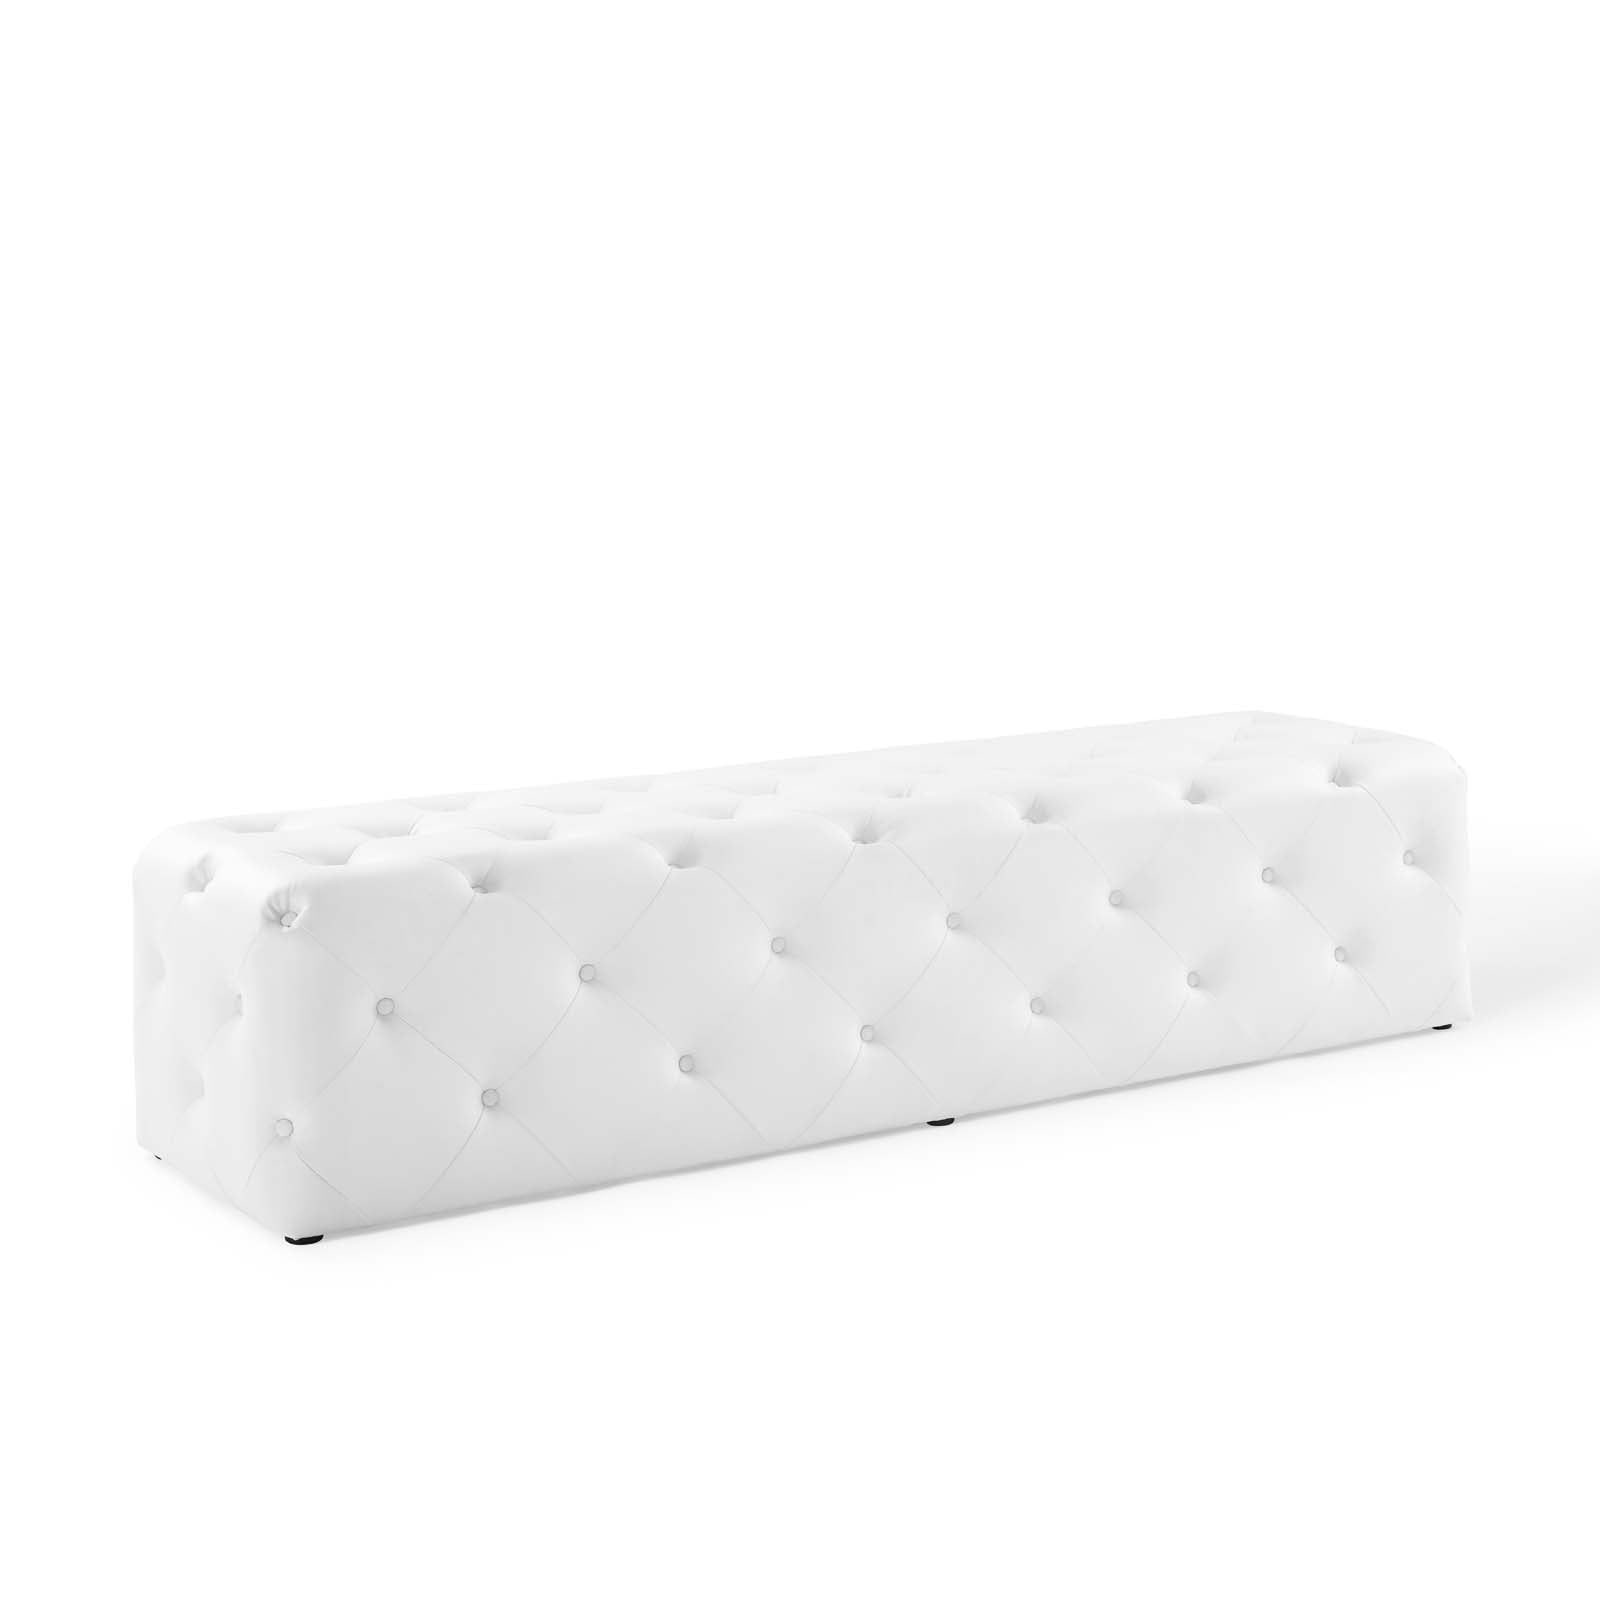 Amour 72" Tufted Button Entryway Faux Leather Bench - East Shore Modern Home Furnishings